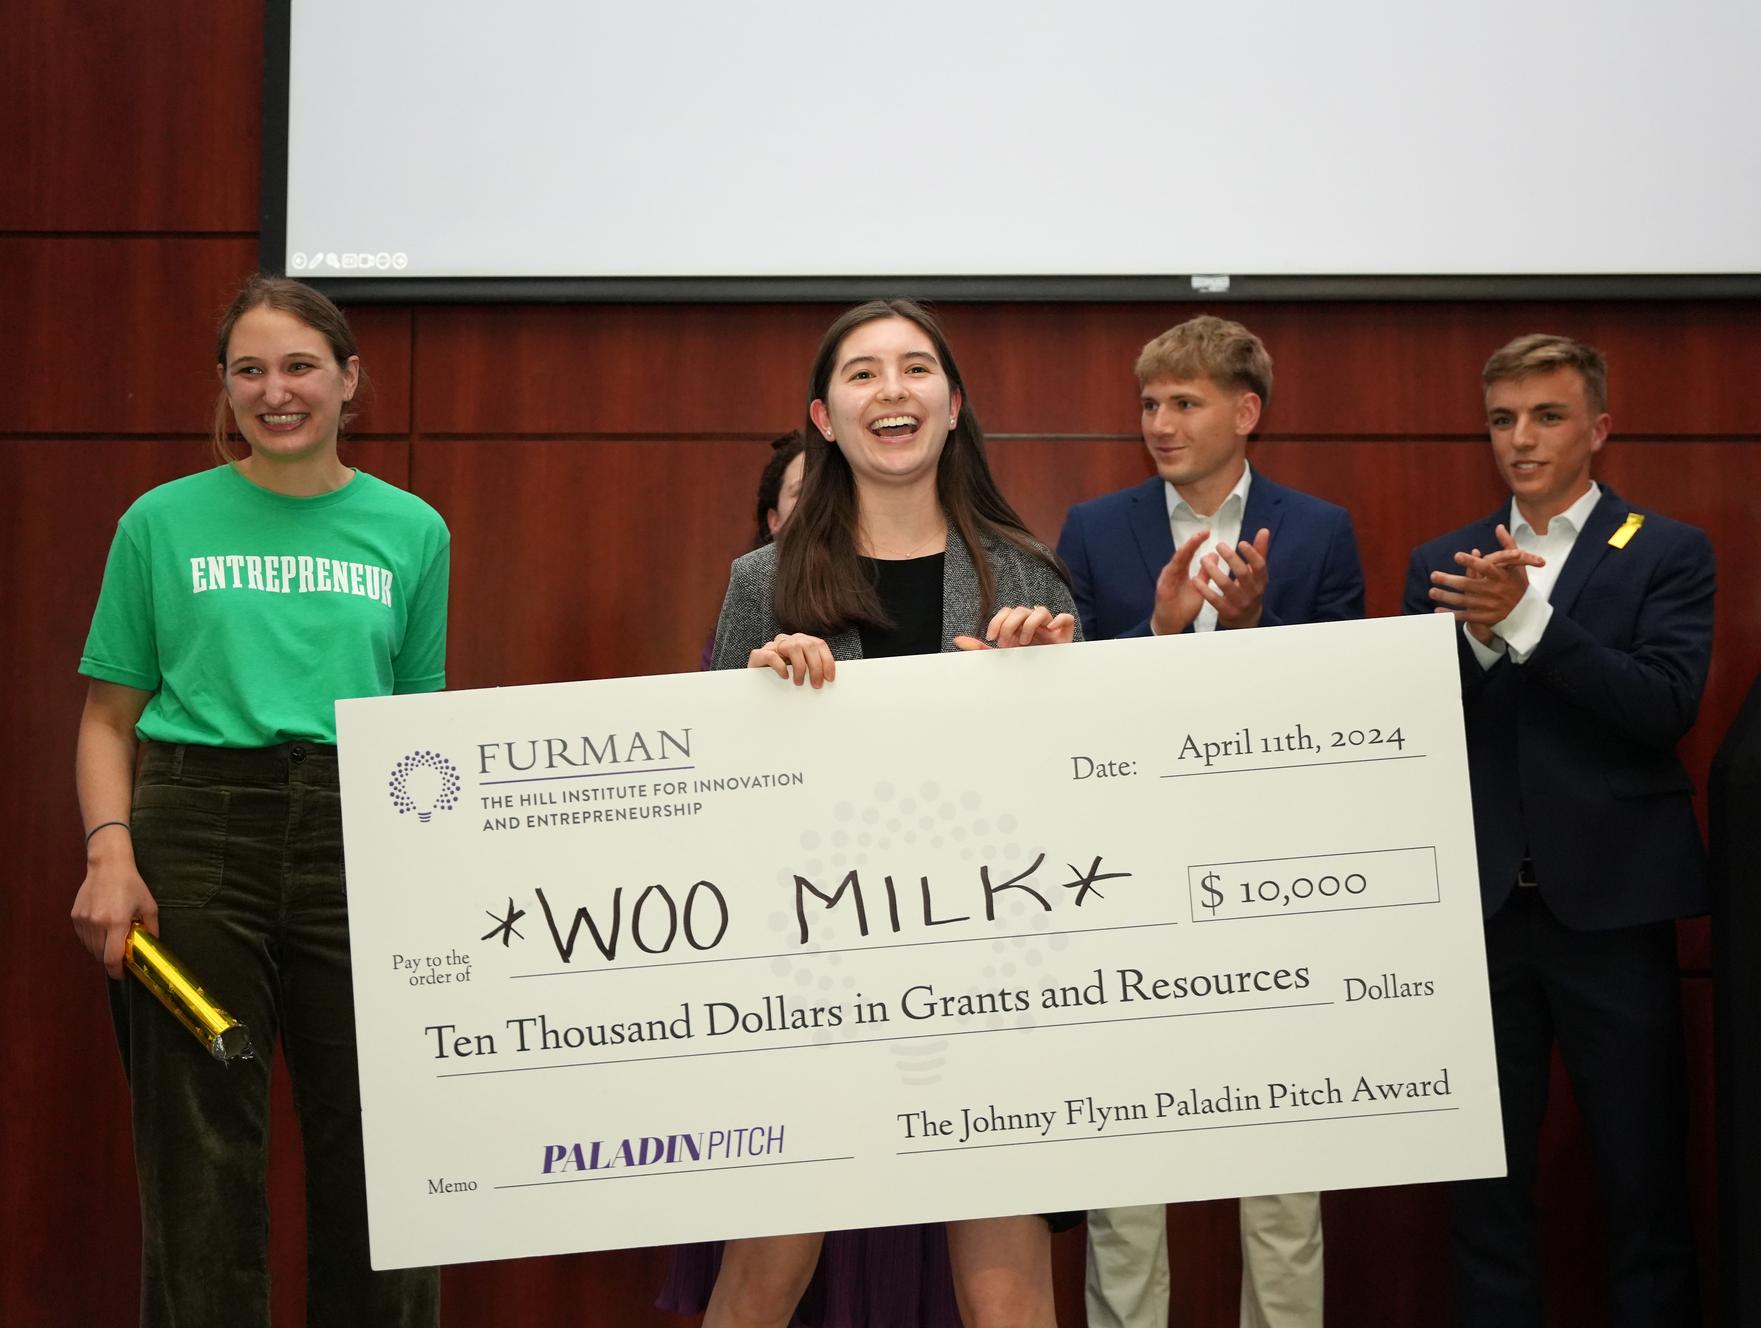 A young woman holds a large check for $10,000 while people look on.